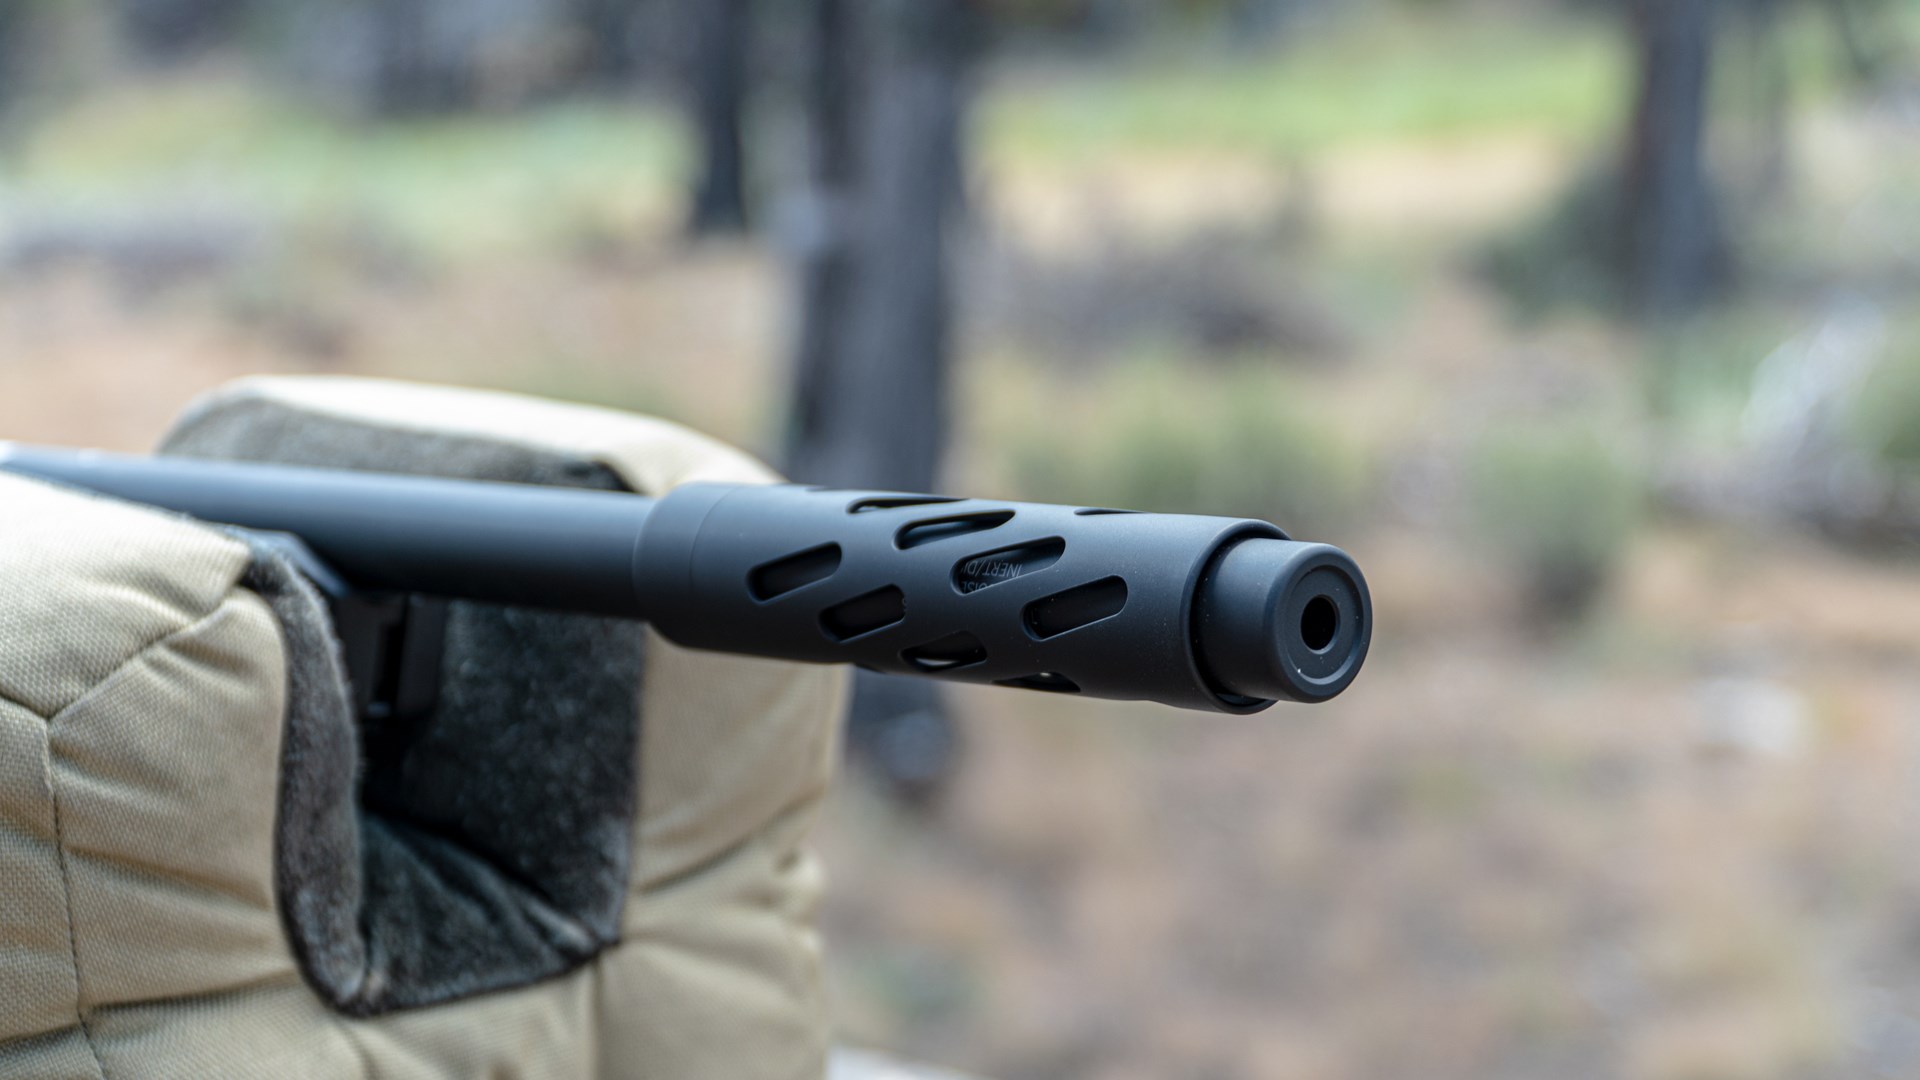 Close-up of the suppressor shroud on the Tactical Solutions Owyhee Magnum rifle.